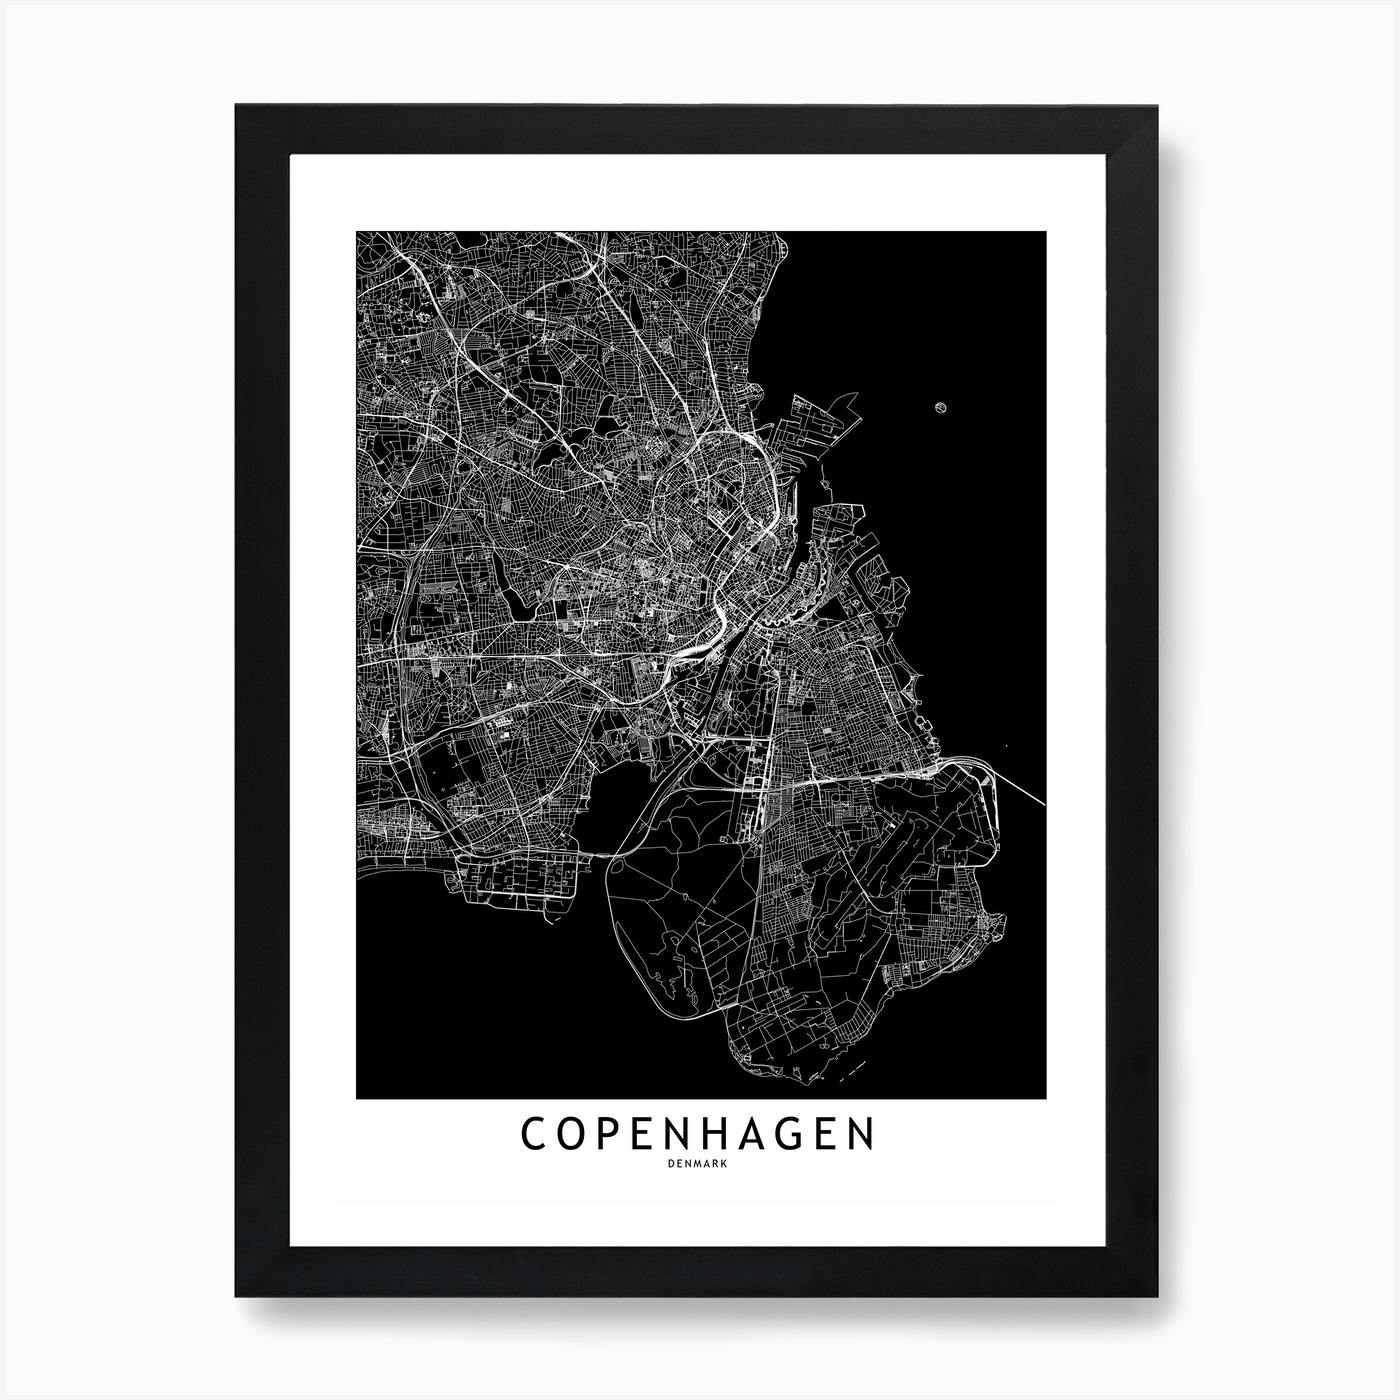 GLASGOW CITY MAP POSTER PRINT MODERN CONTEMPORARY CITIES TRAVEL IKEA FRAMES 